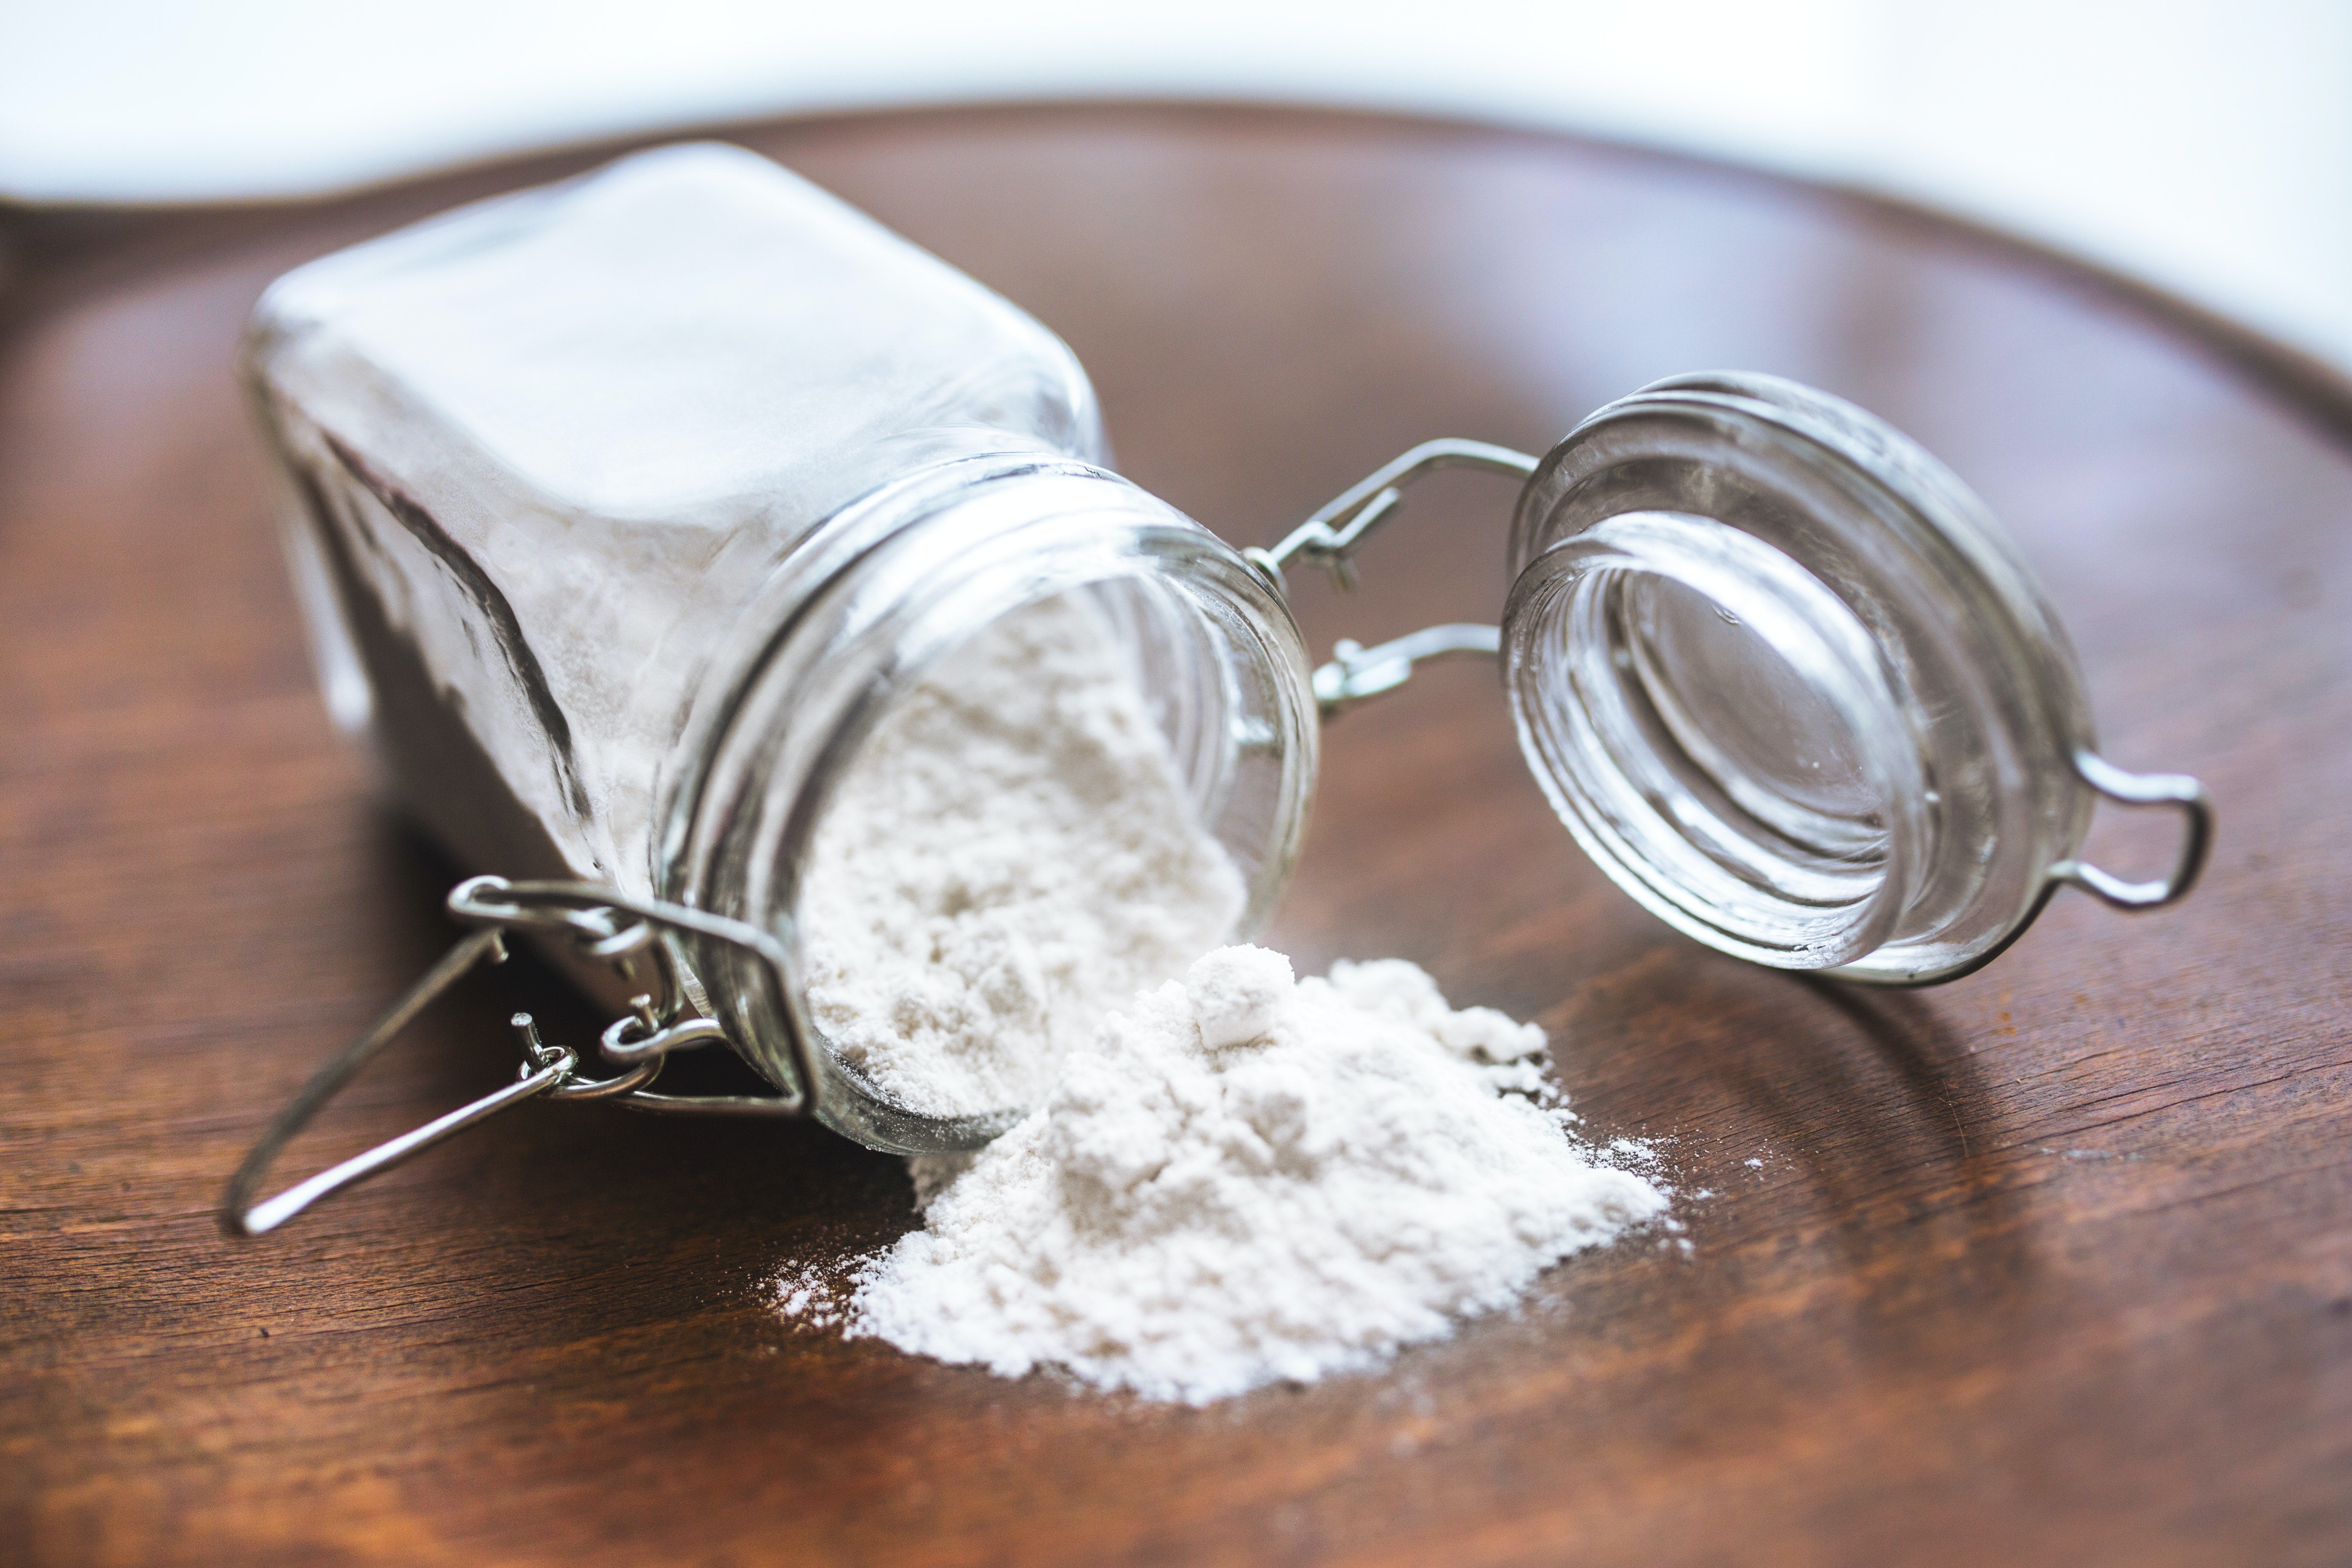 Can Baking Soda Improve Your Oral Health?